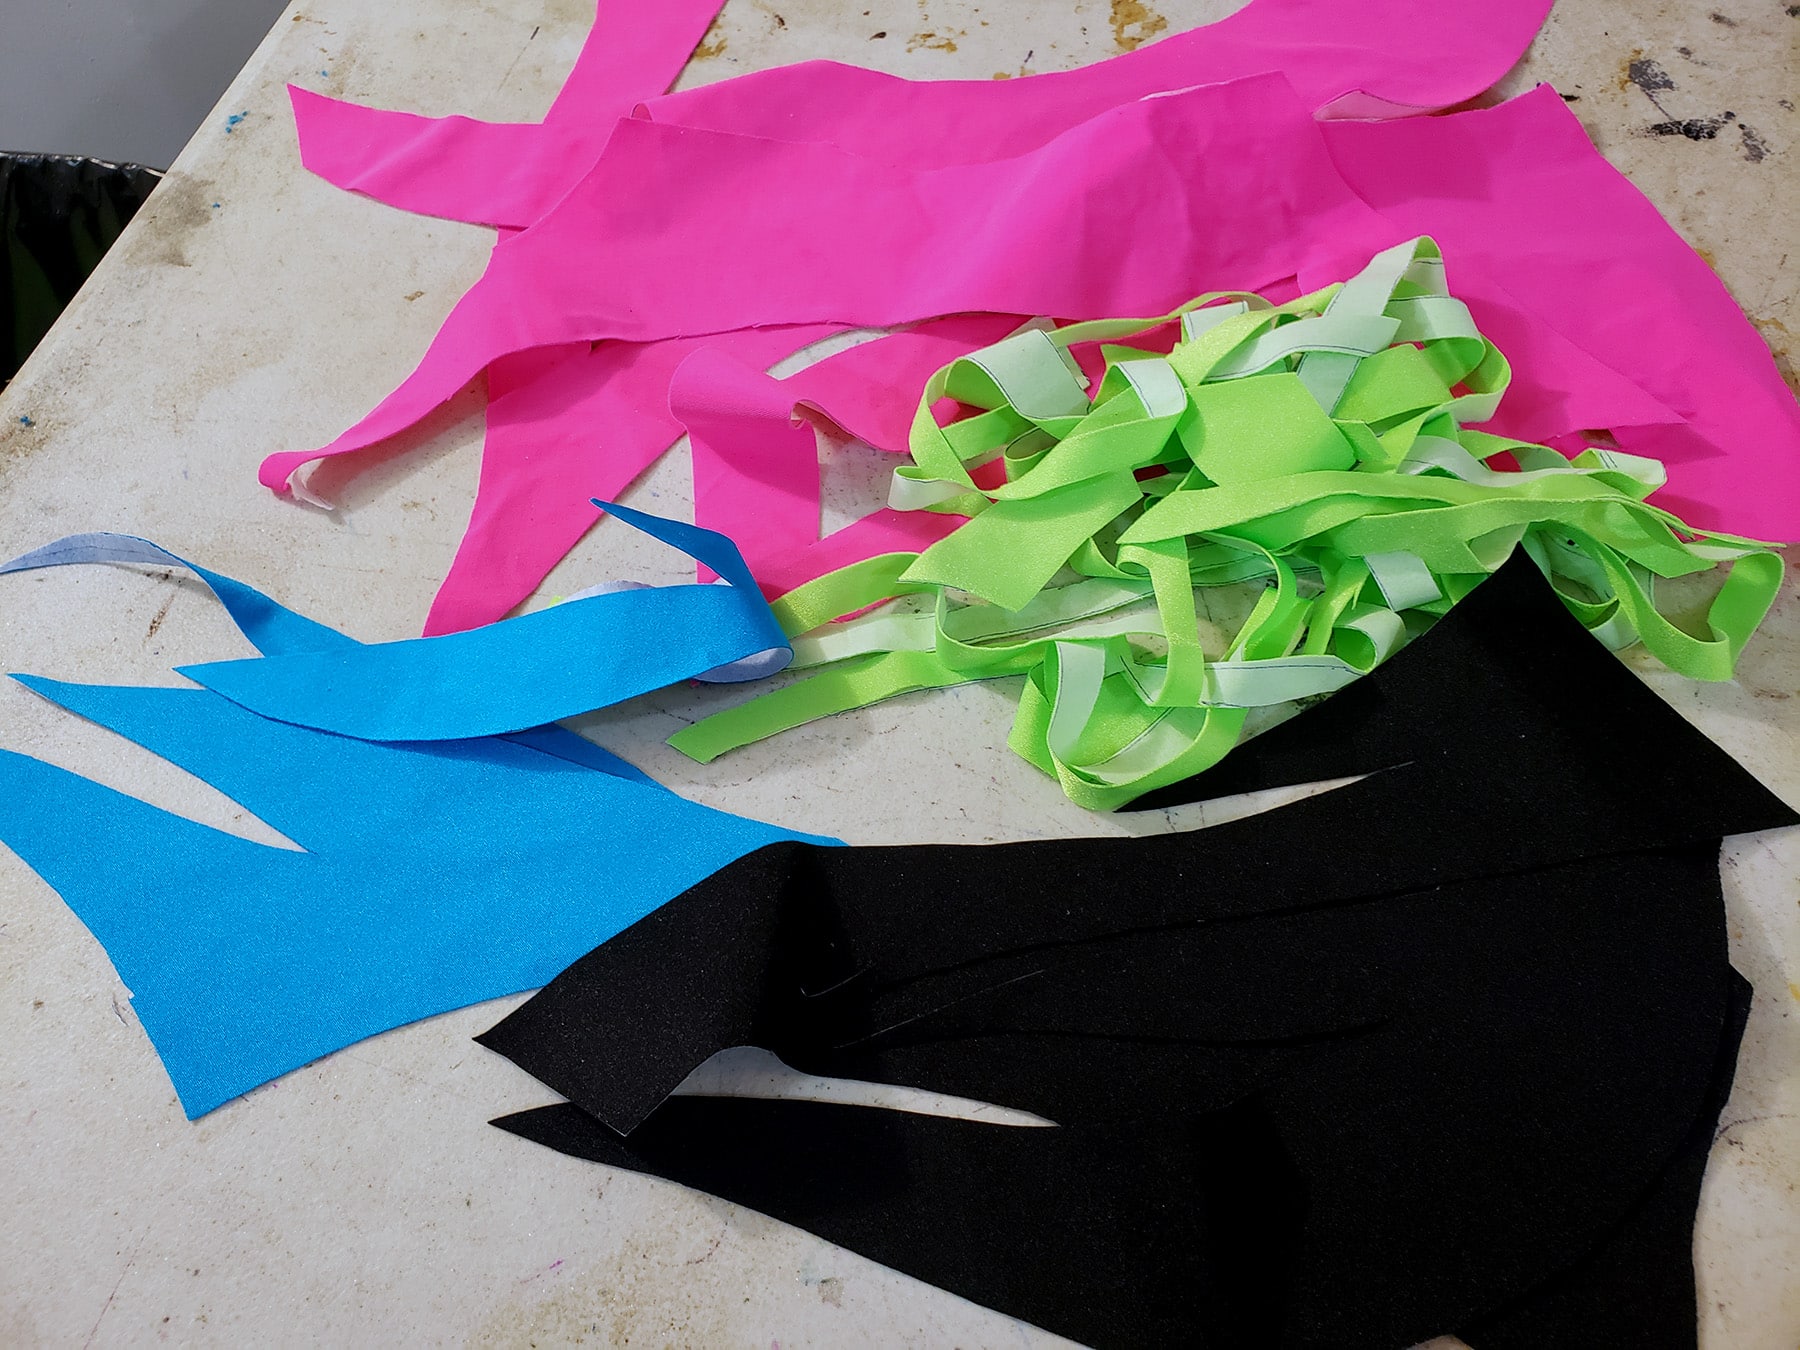 Small piles of bright cut spandex pieces in neon green, neon pink, sky blue, and black.